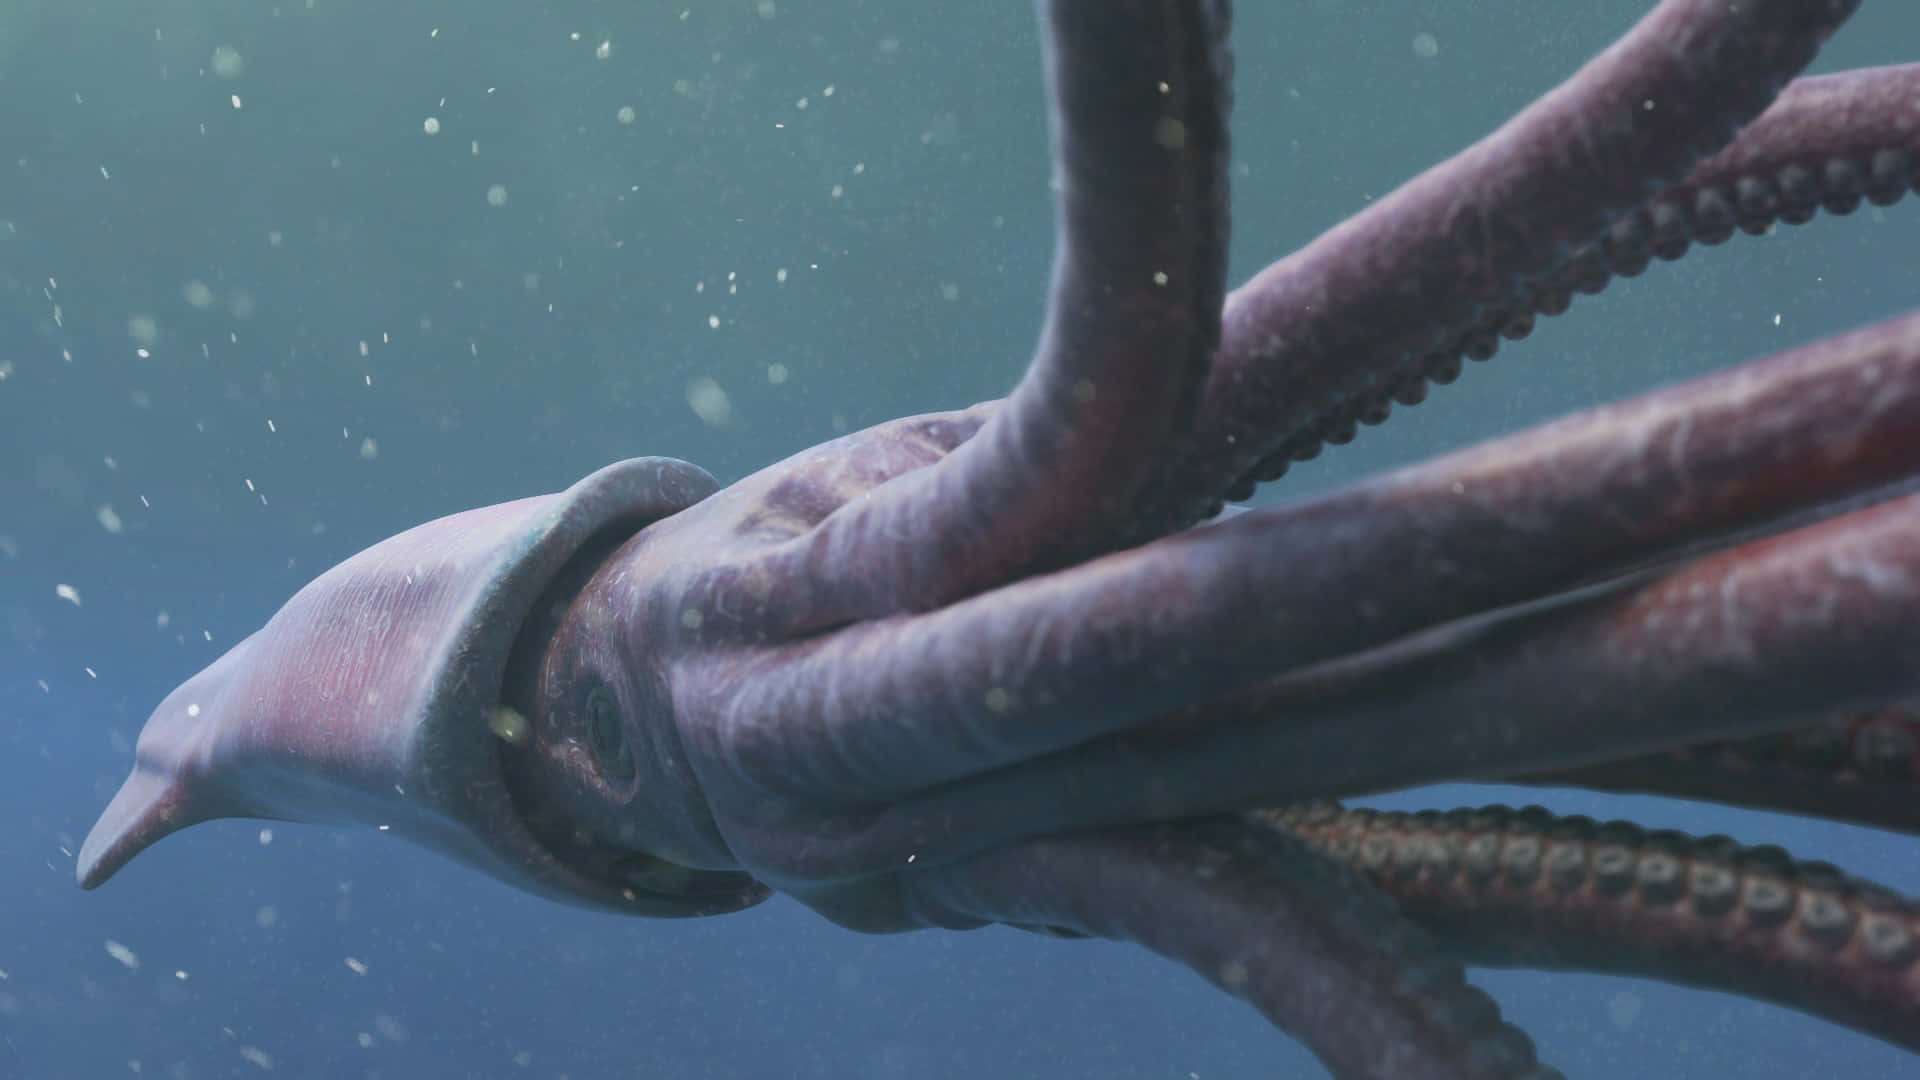 A Giant Squid Spotted Swimming in Oceans